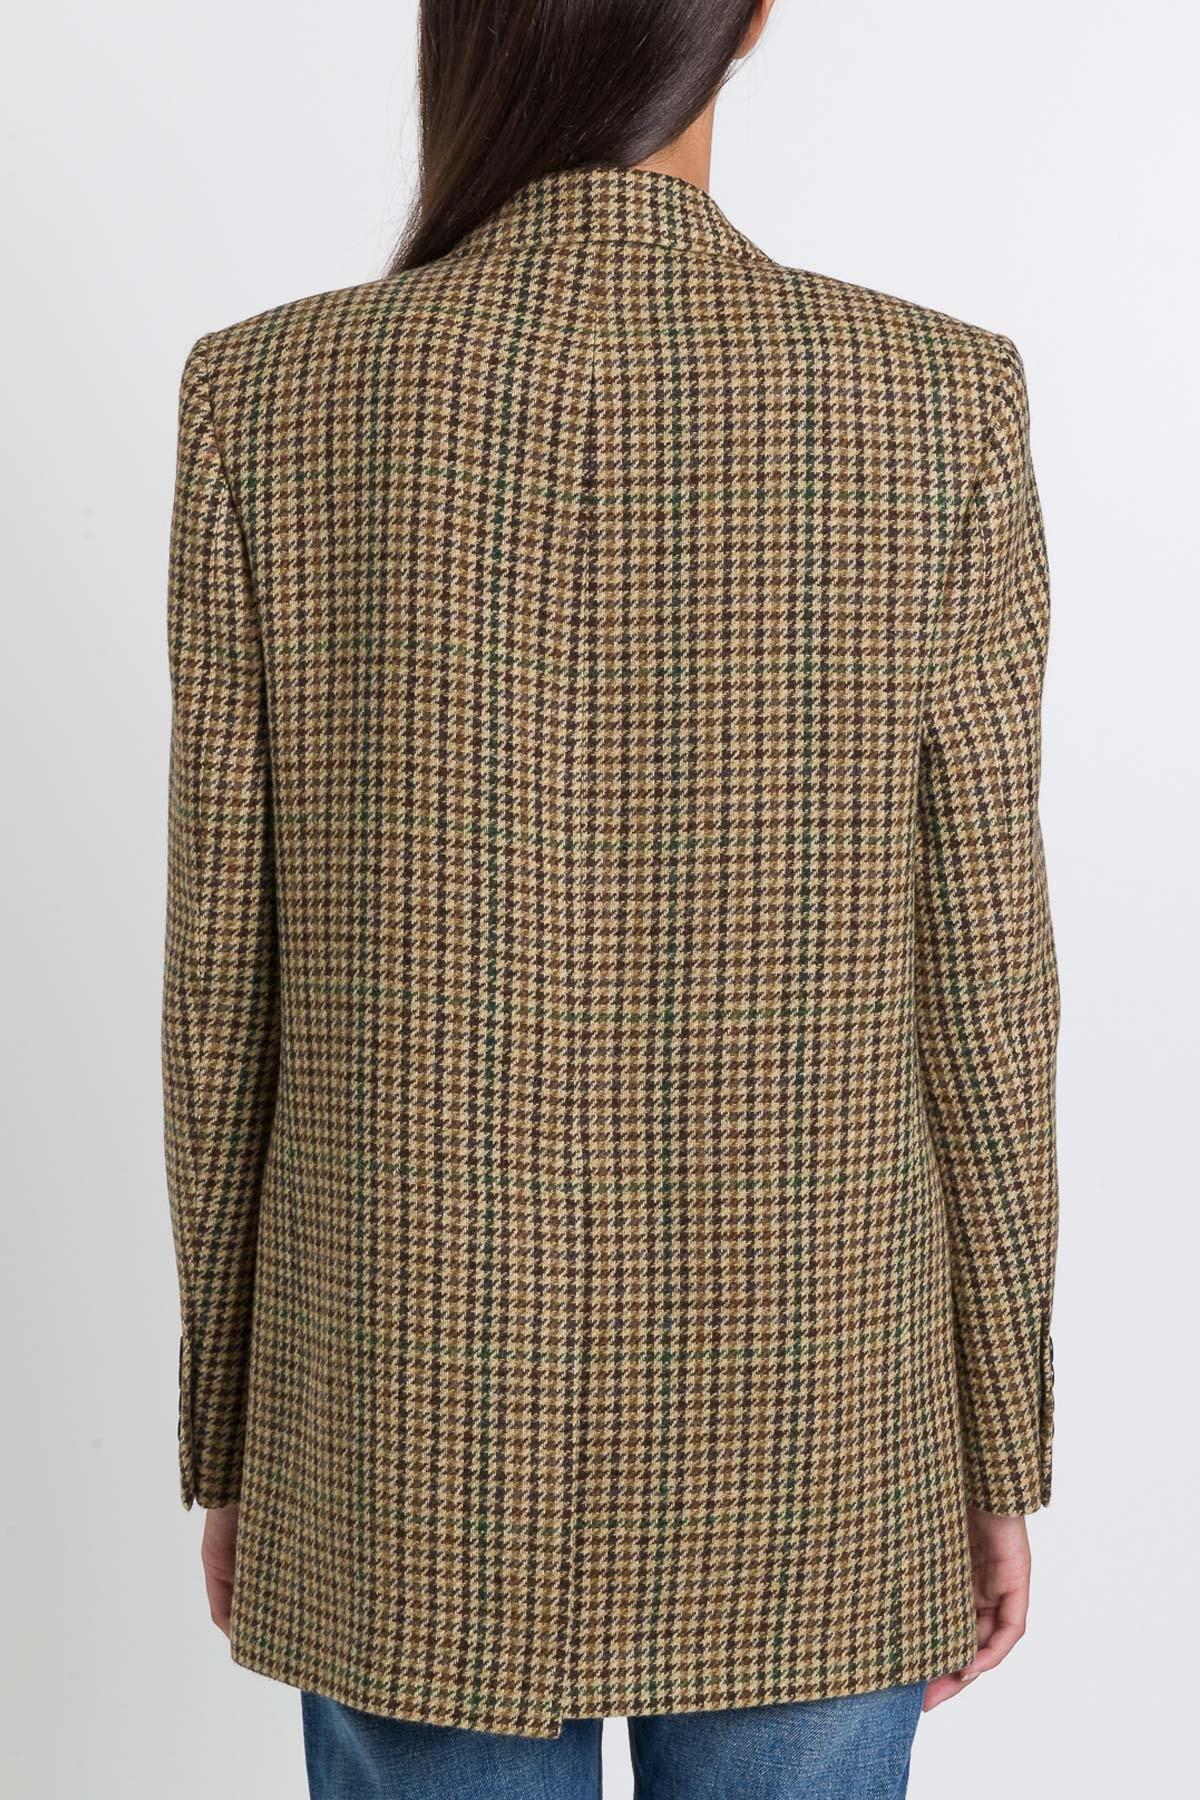 Celine Tournon Jacket In Checked Wool in Brown | Lyst